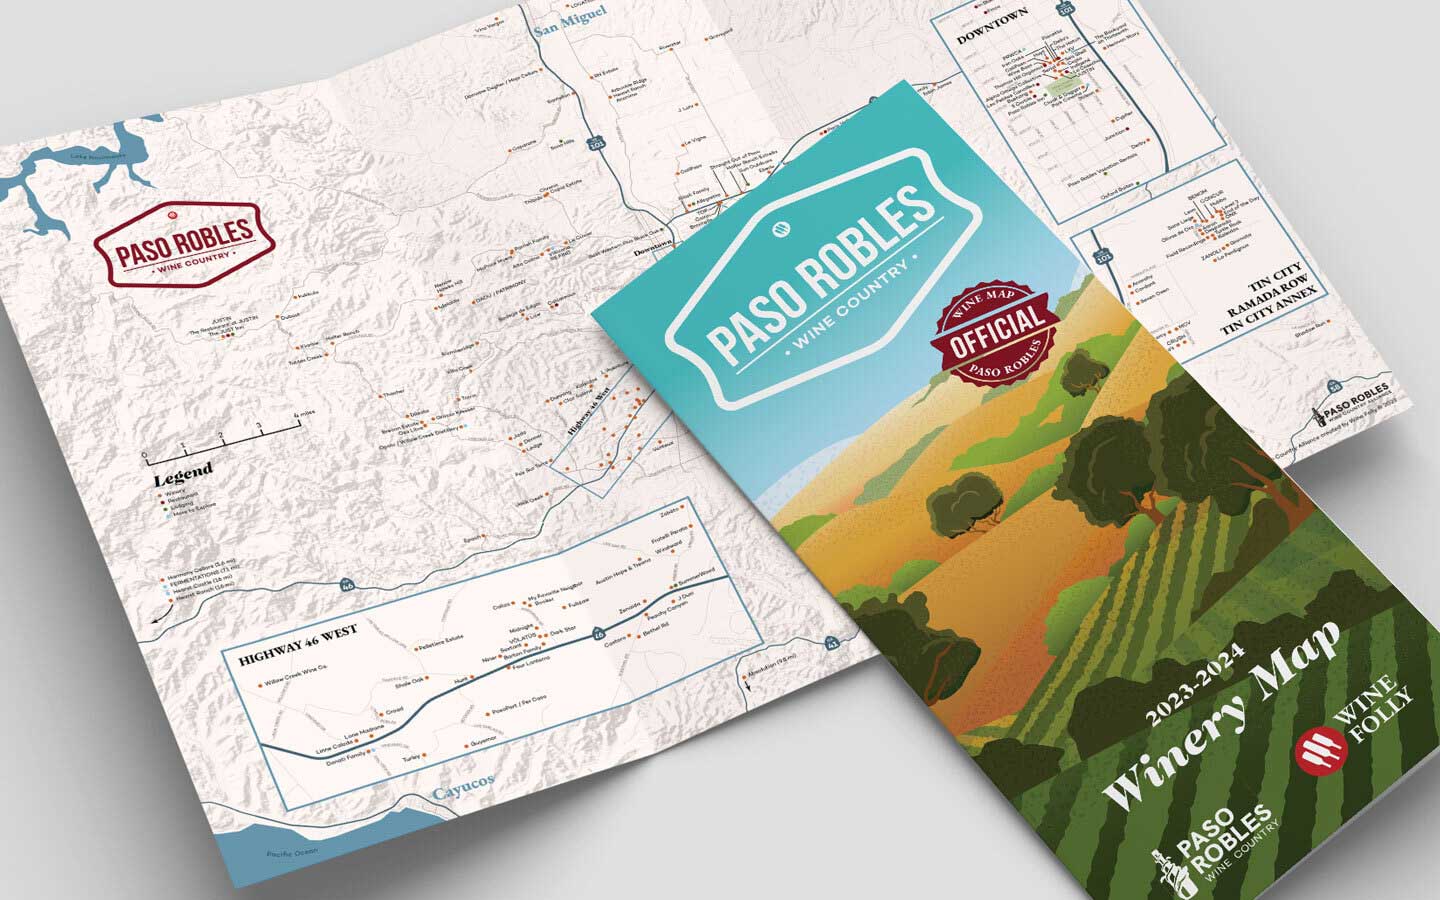 Paso Robles Printed Winery Map